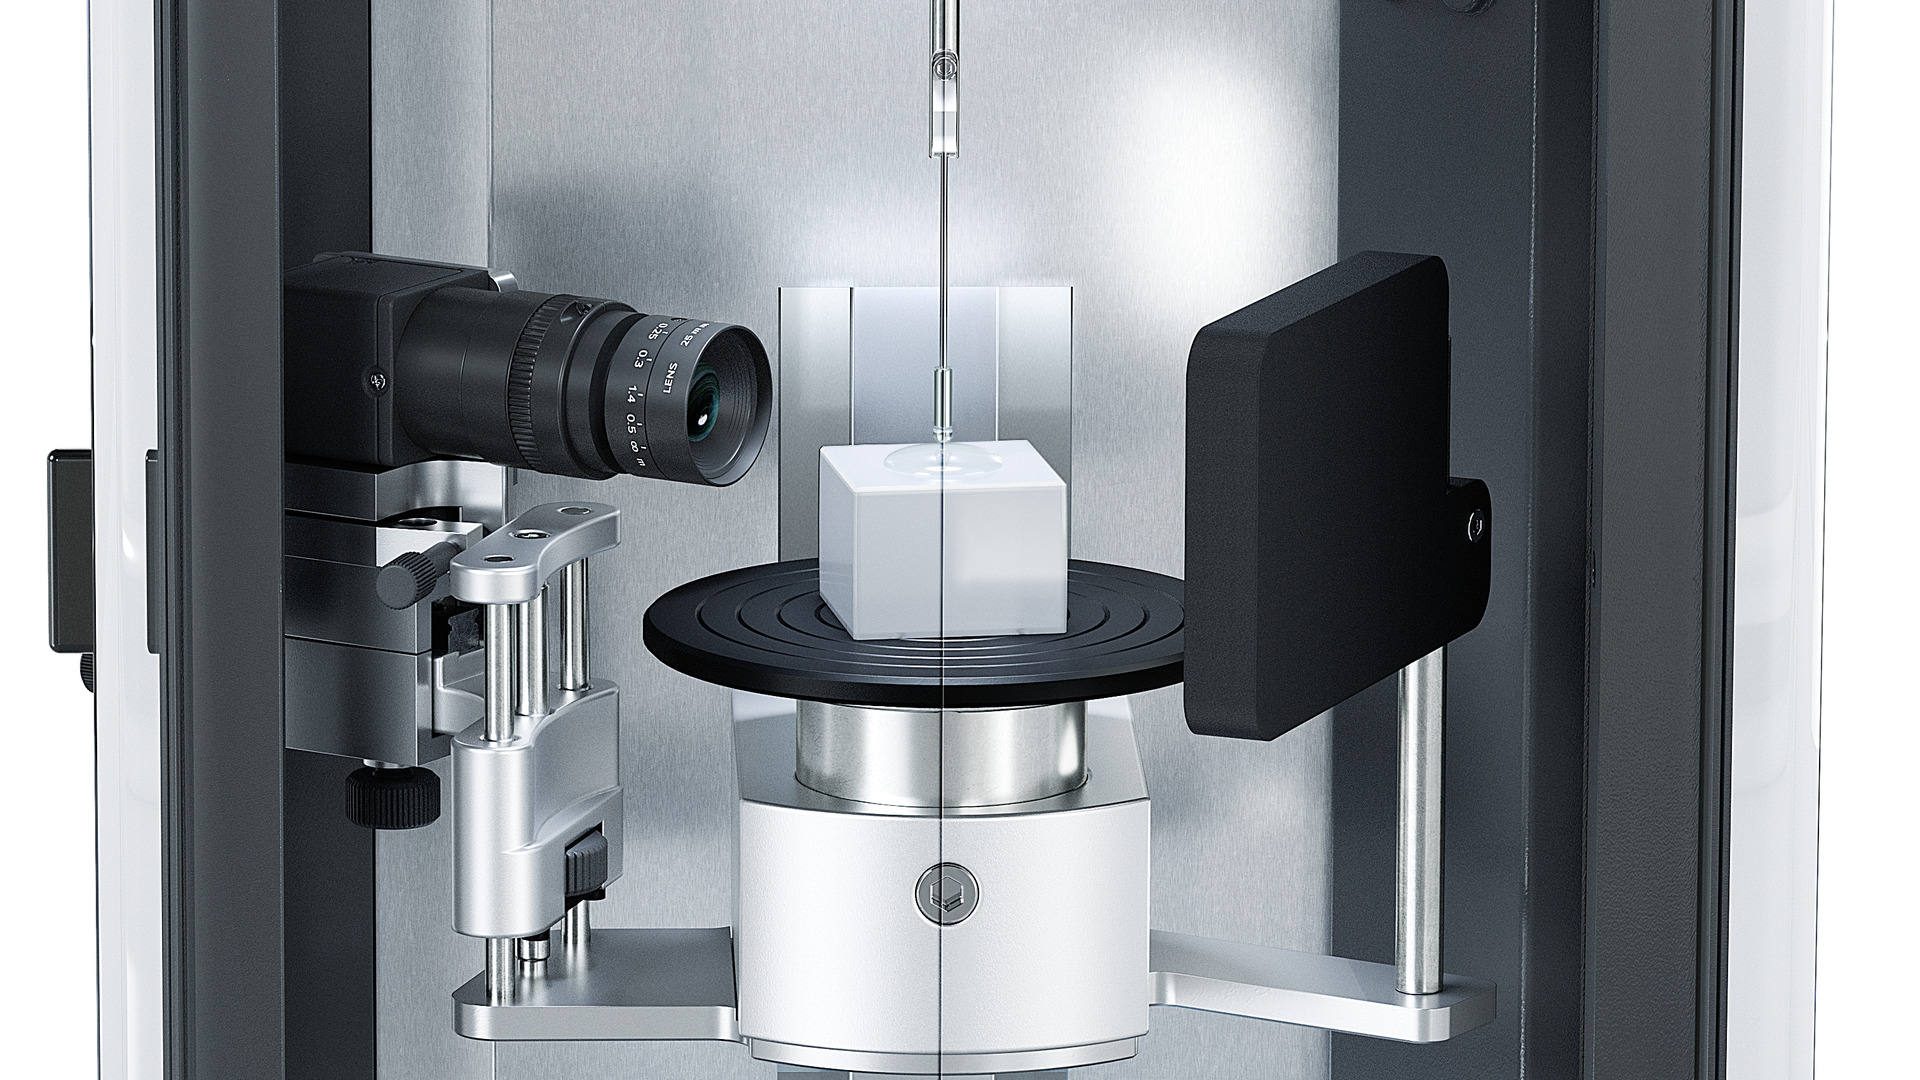 The optional camera records your adhesion measurement and paves the way for new methods.